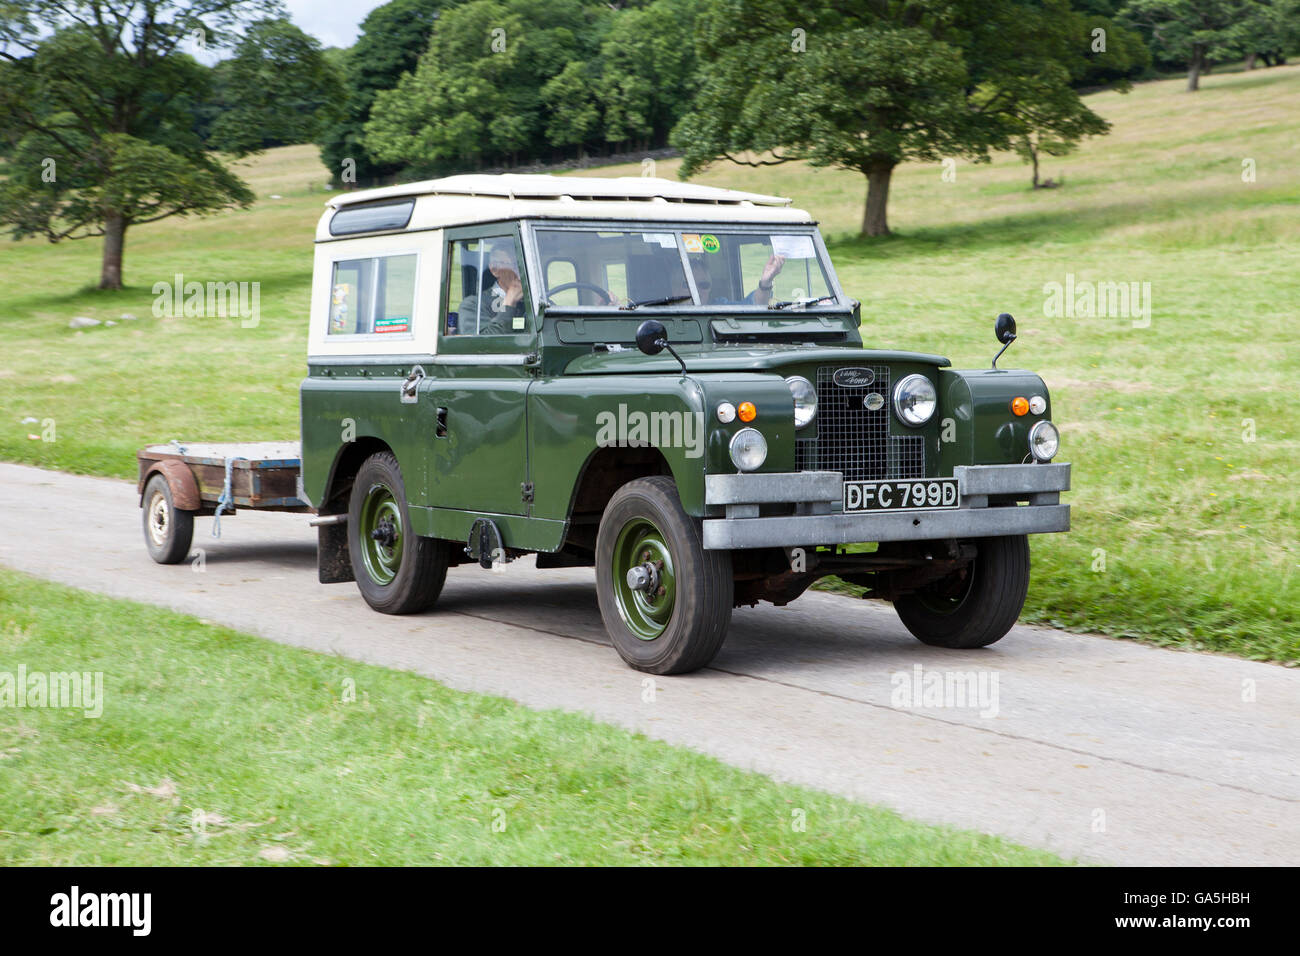 Land rover 88' - 4 cyl at Leighton Hall Classic Car Rally, Carnforth, Lancashire, UK.  3rd July, 2016.  The annual classic car rally takes place at the magnificent Leighton Hall in Carnforth in Lancashire.  British classic sports cars ranging from MG's to American muscle cars like the Dodge Vipers & Ford Mustangs.  The spectator event drew thousands of visitors to this scenic part of the country on the north west coast of England.  Credit:  Cernan Elias/Alamy Live News Stock Photo